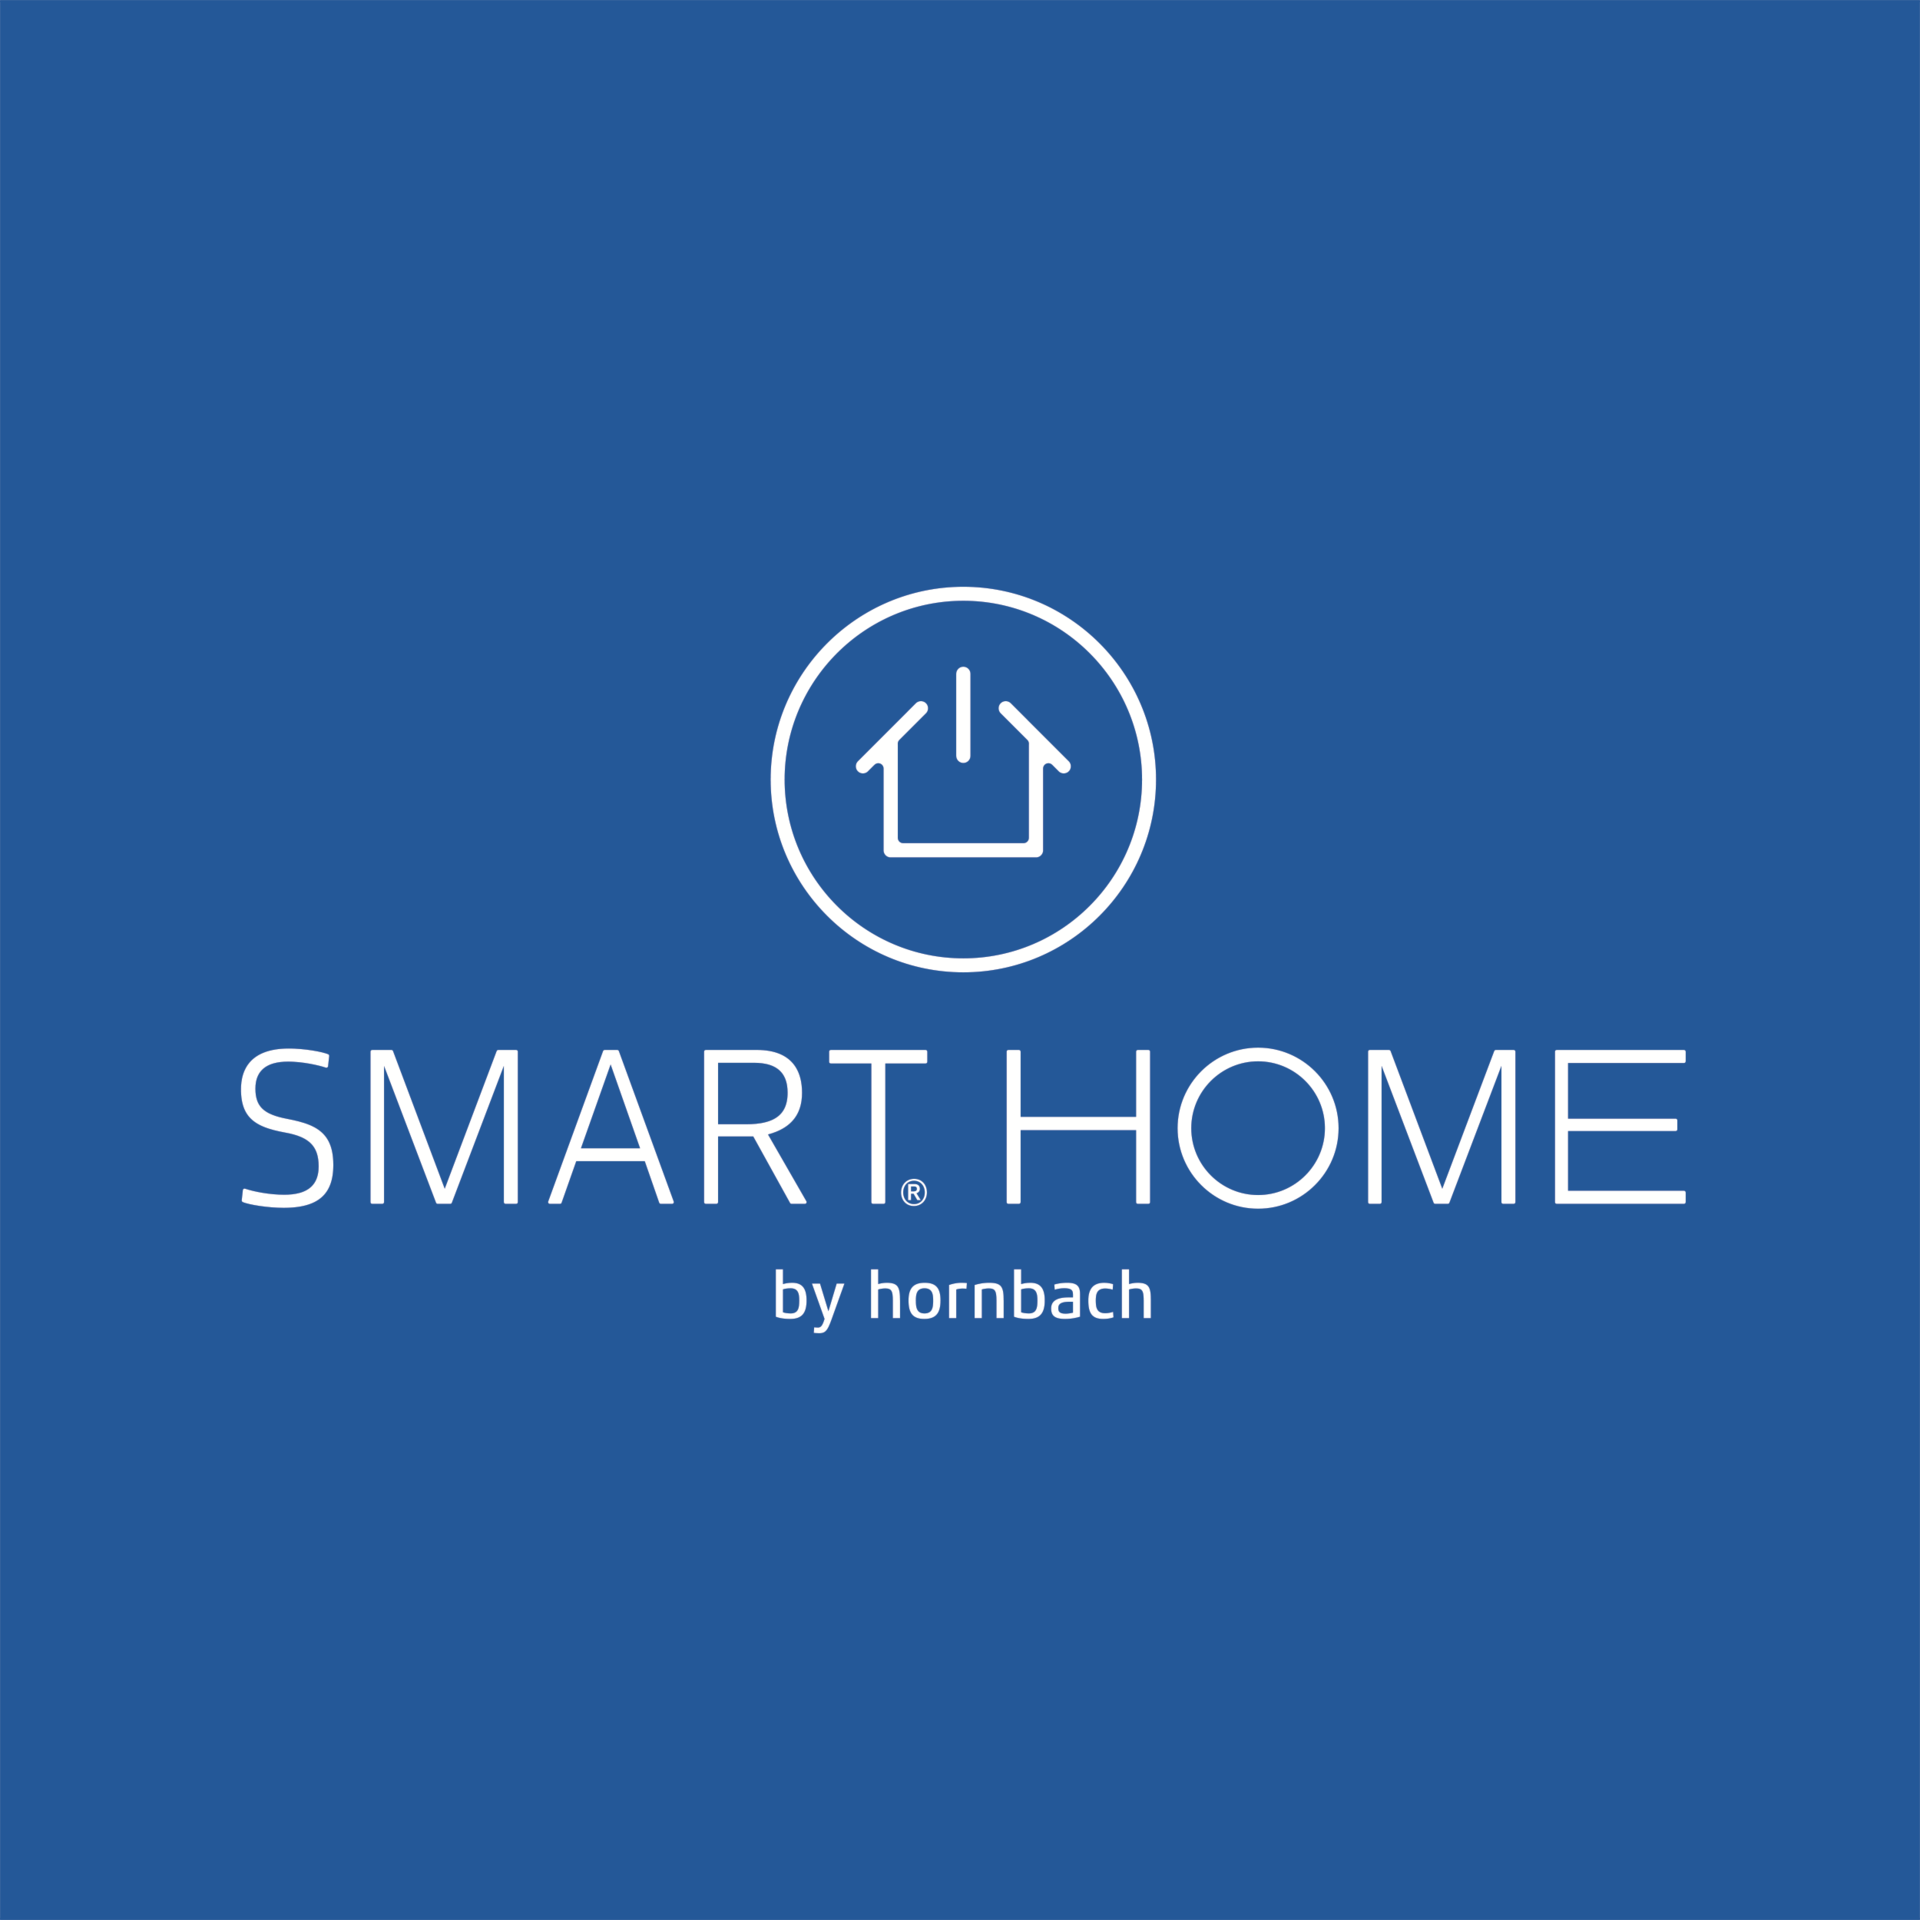 Smart Home by hornbach